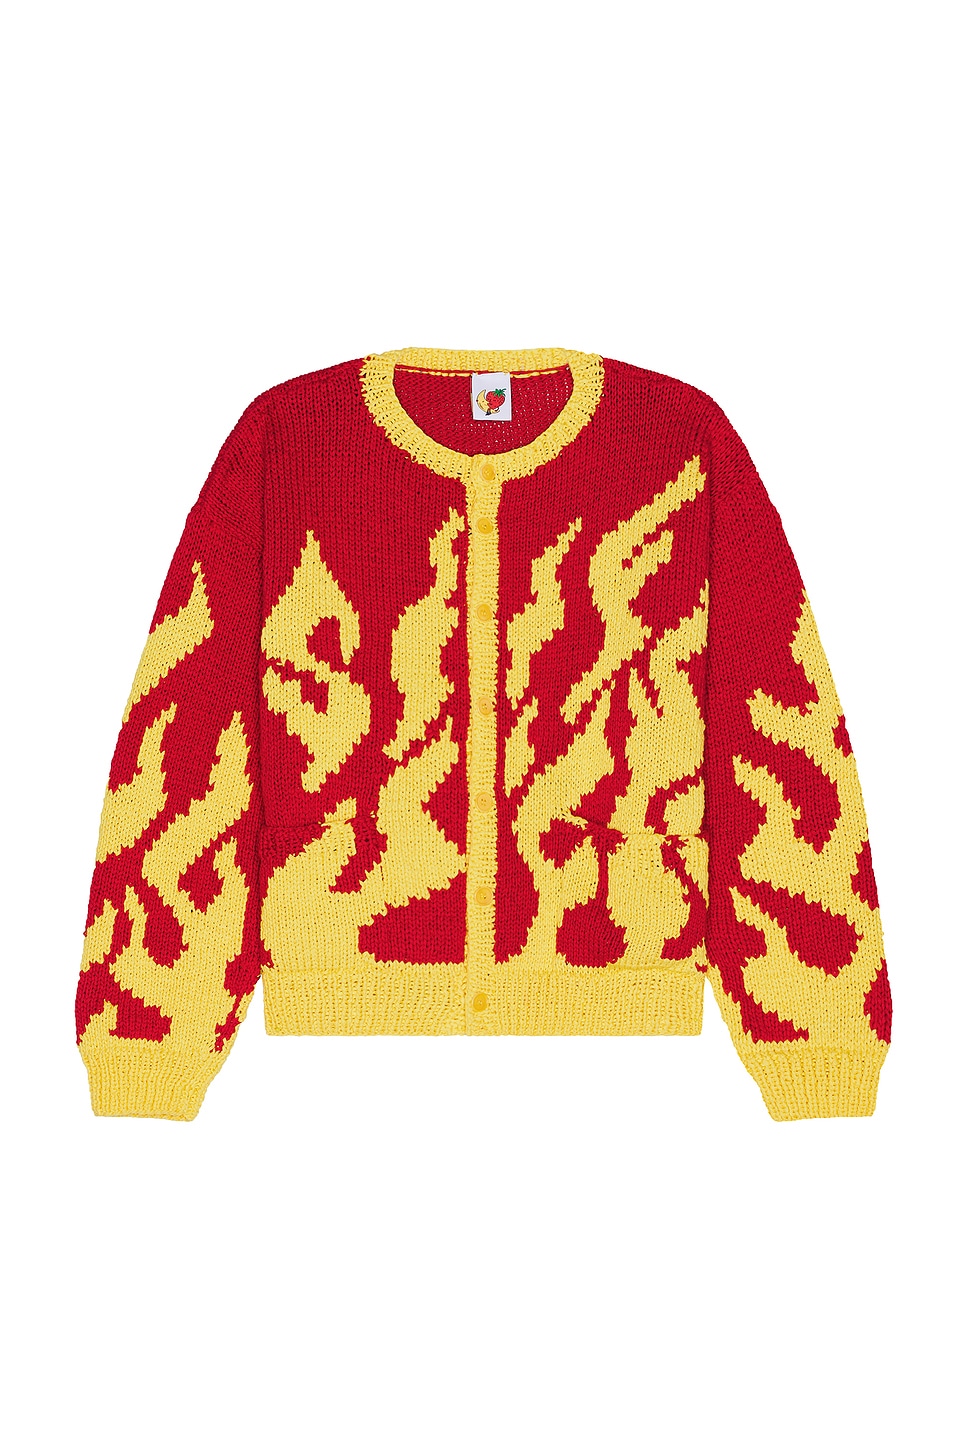 Image 1 of Sky High Farm Workwear Flame Hand Knit Cardigan in Red